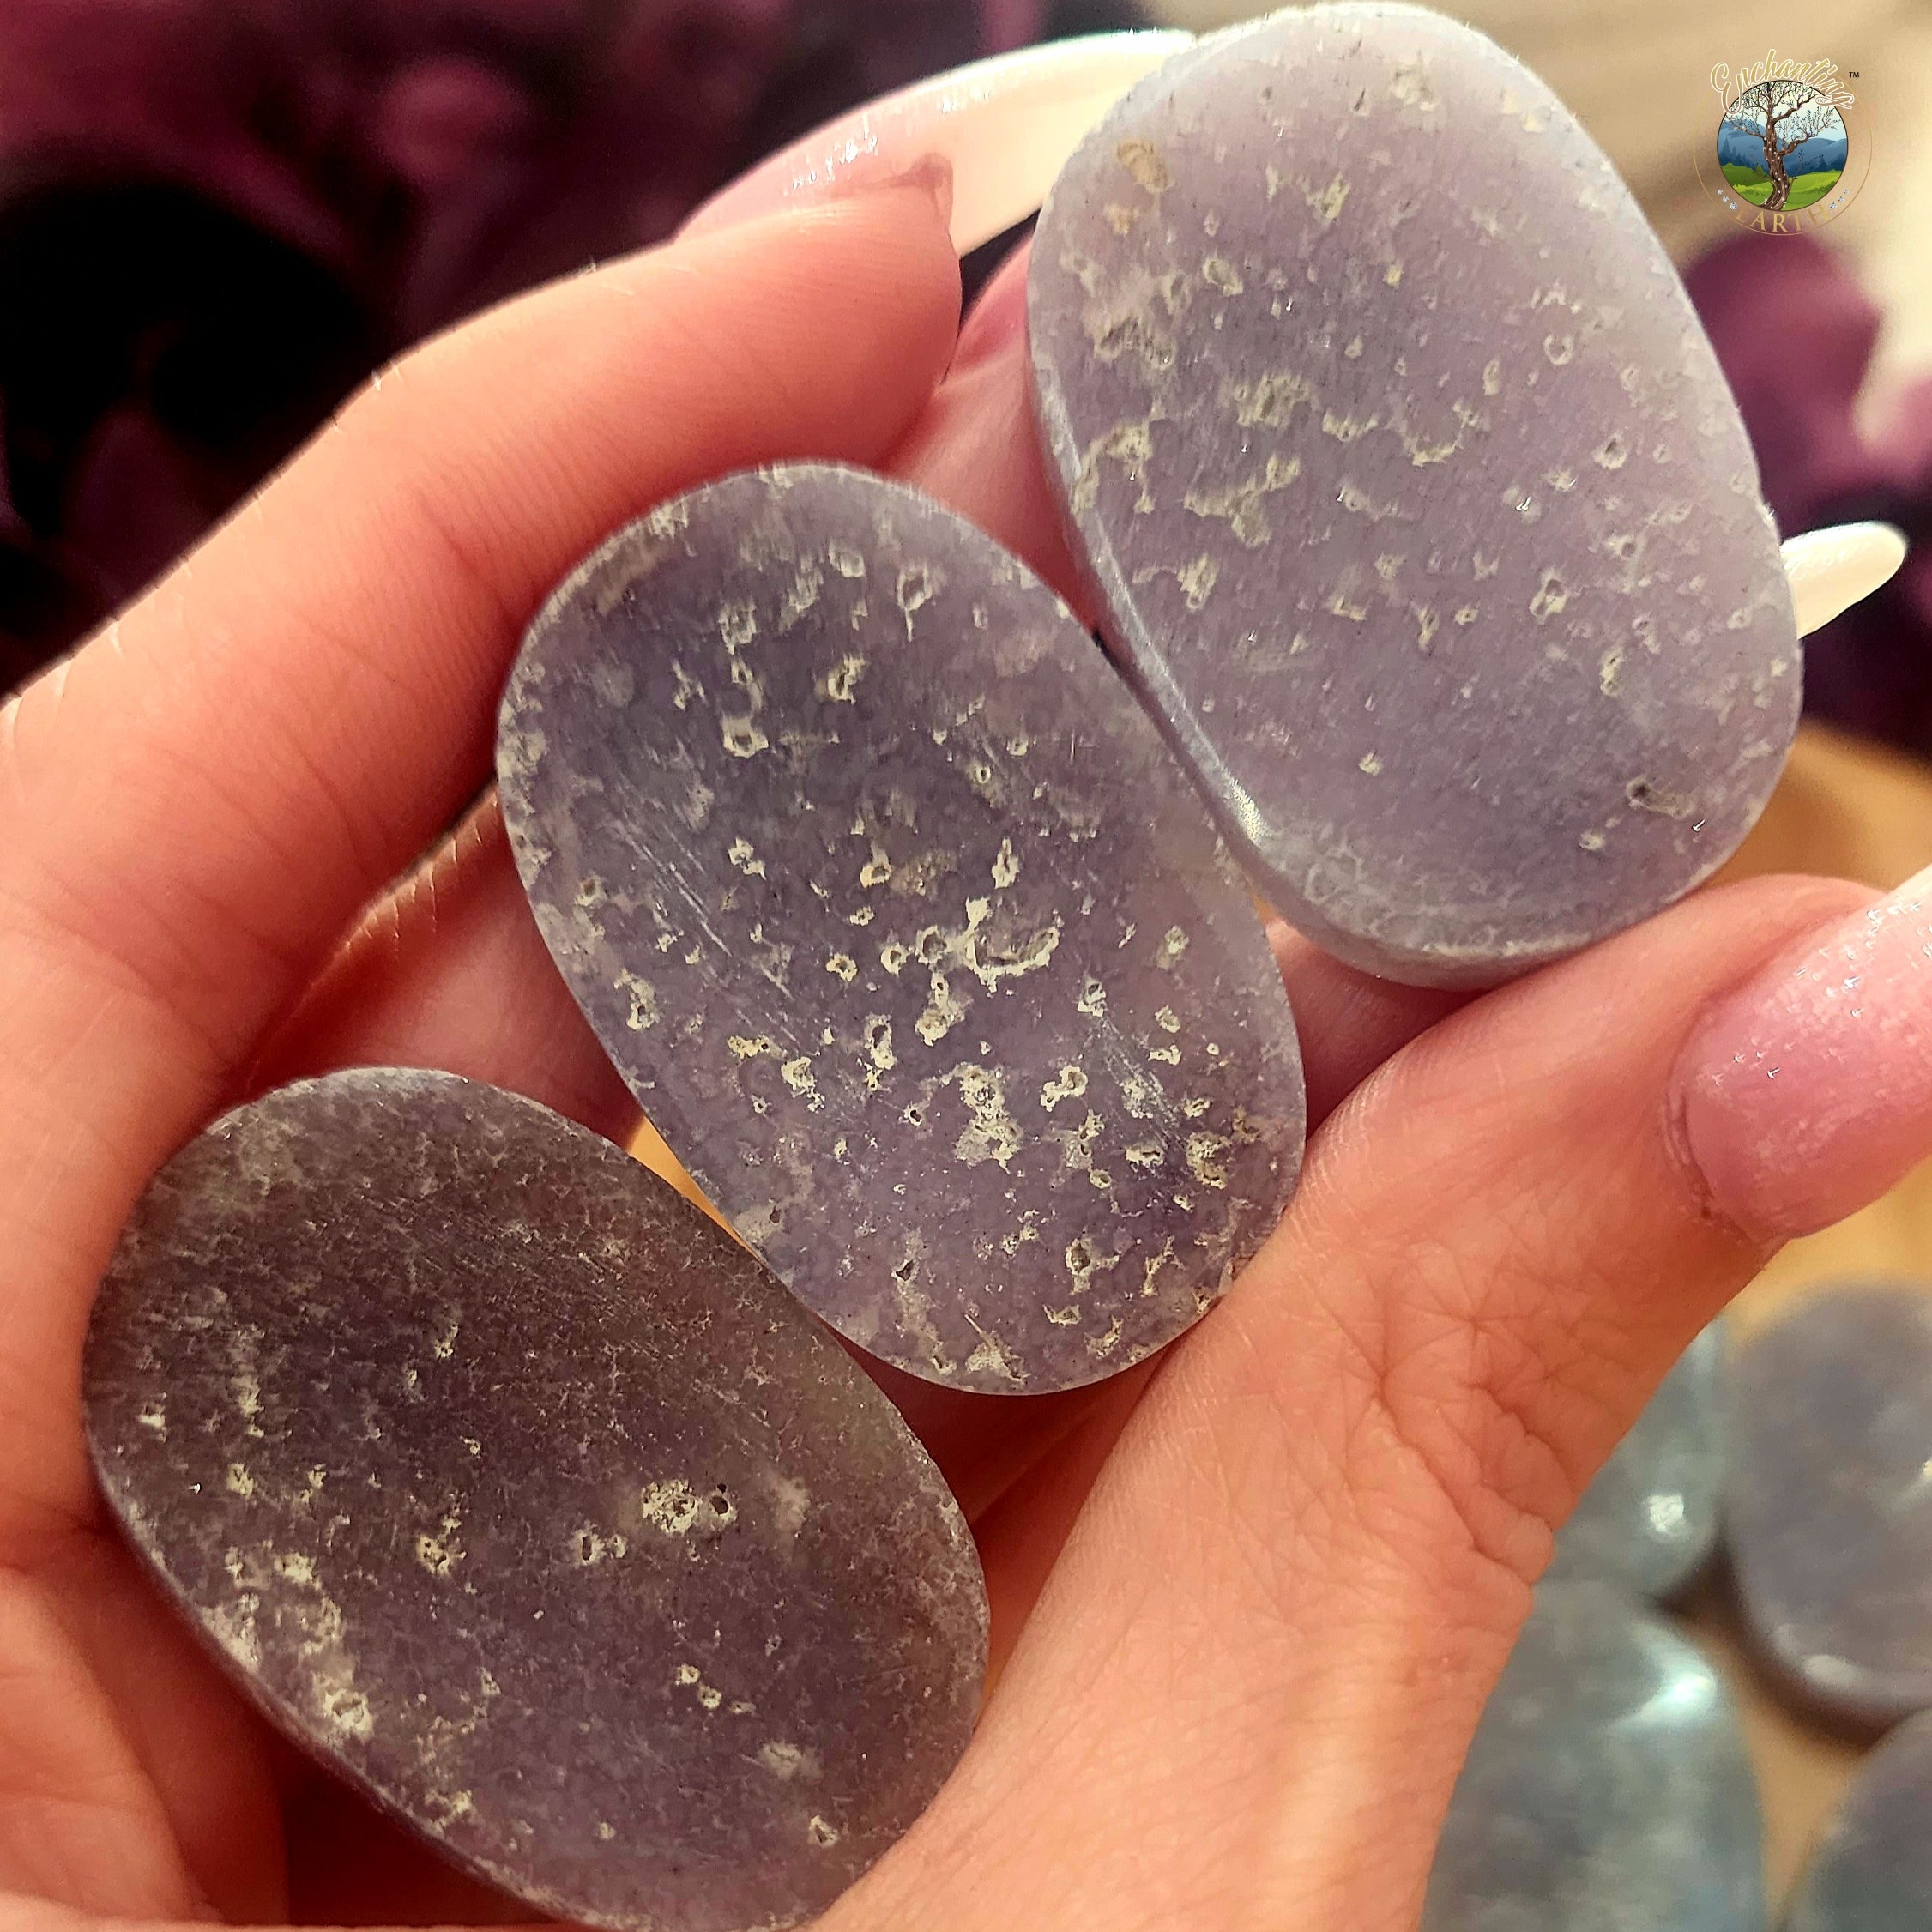 Grape Agate Purple Chalcedony Worry Stone for Dream Recall, Intuition and Meditation